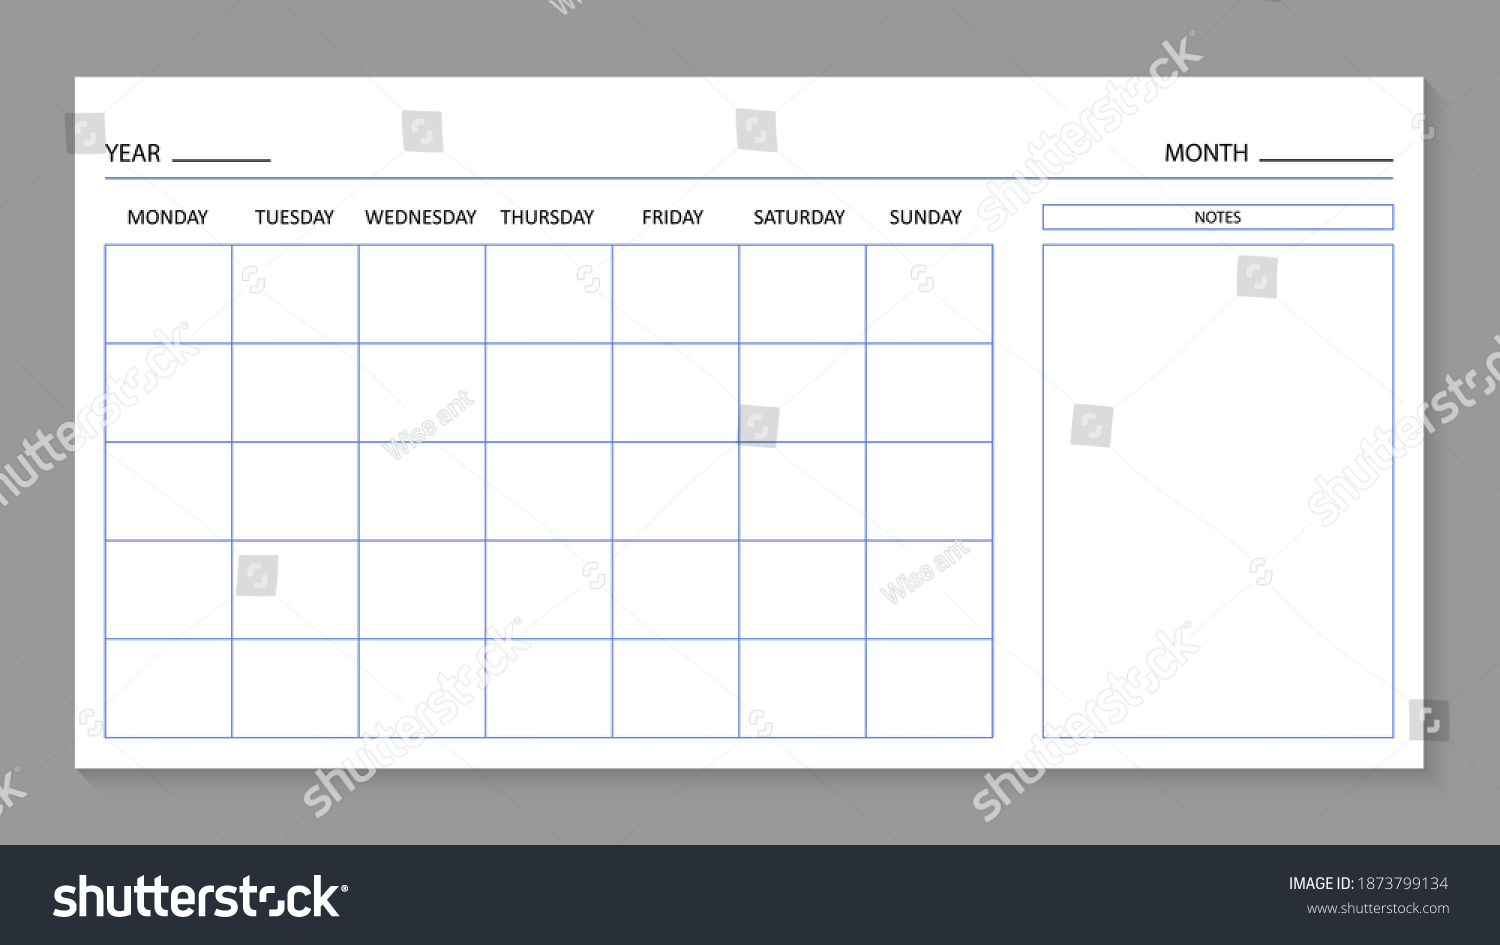 Month Planner Template Blank Calendar 2021 Stock Vector (Royalty Free ...